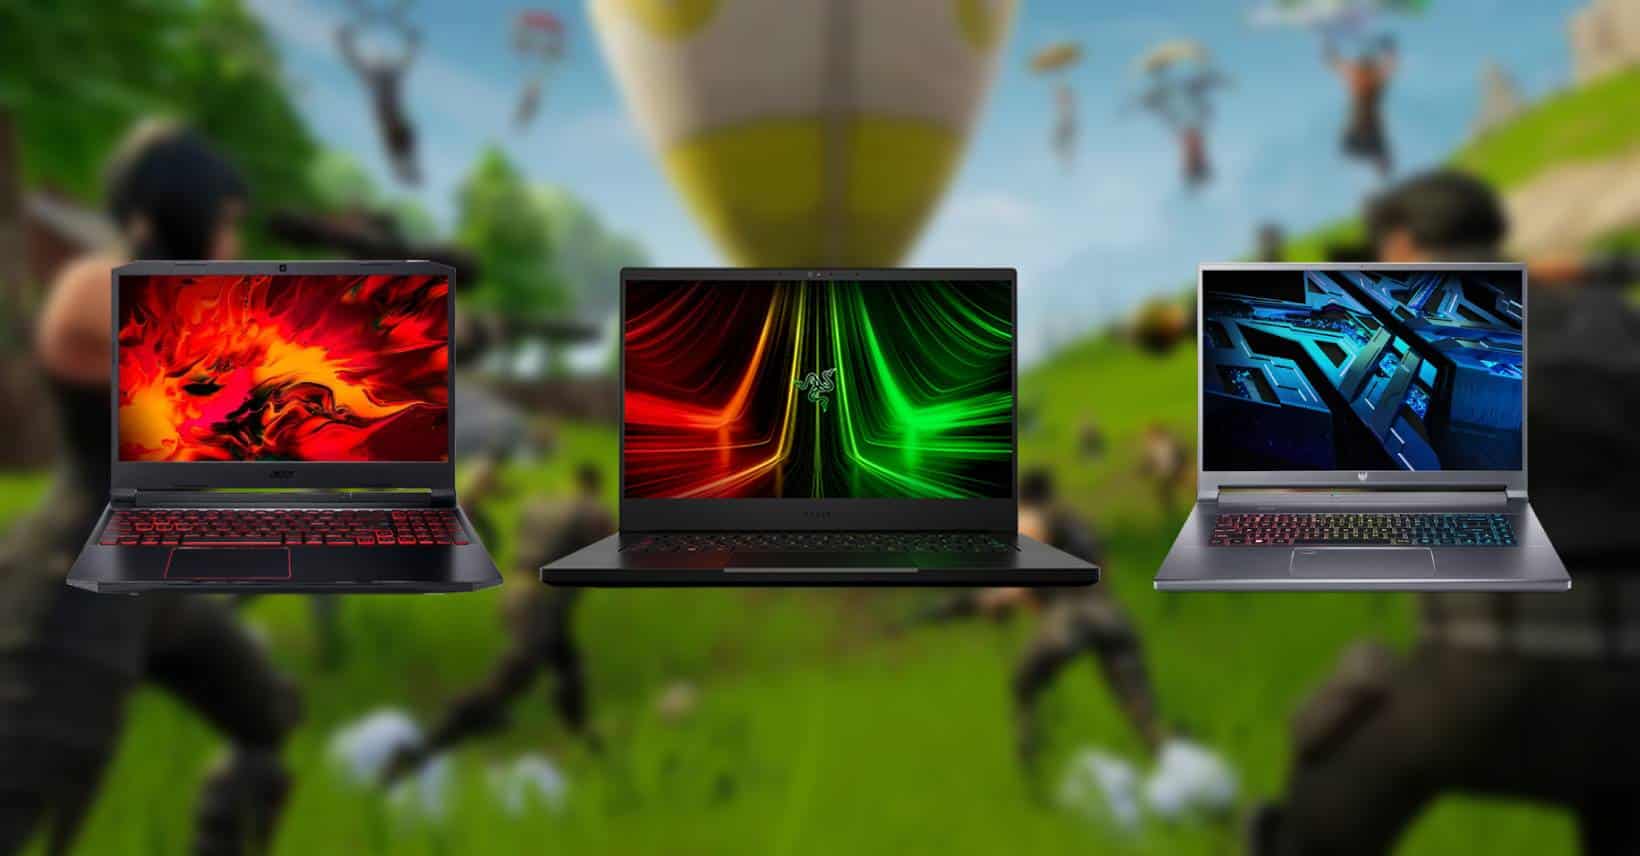 Looking for the best gaming laptop for Fortnite? These models are top of the line for all your gaming needs.